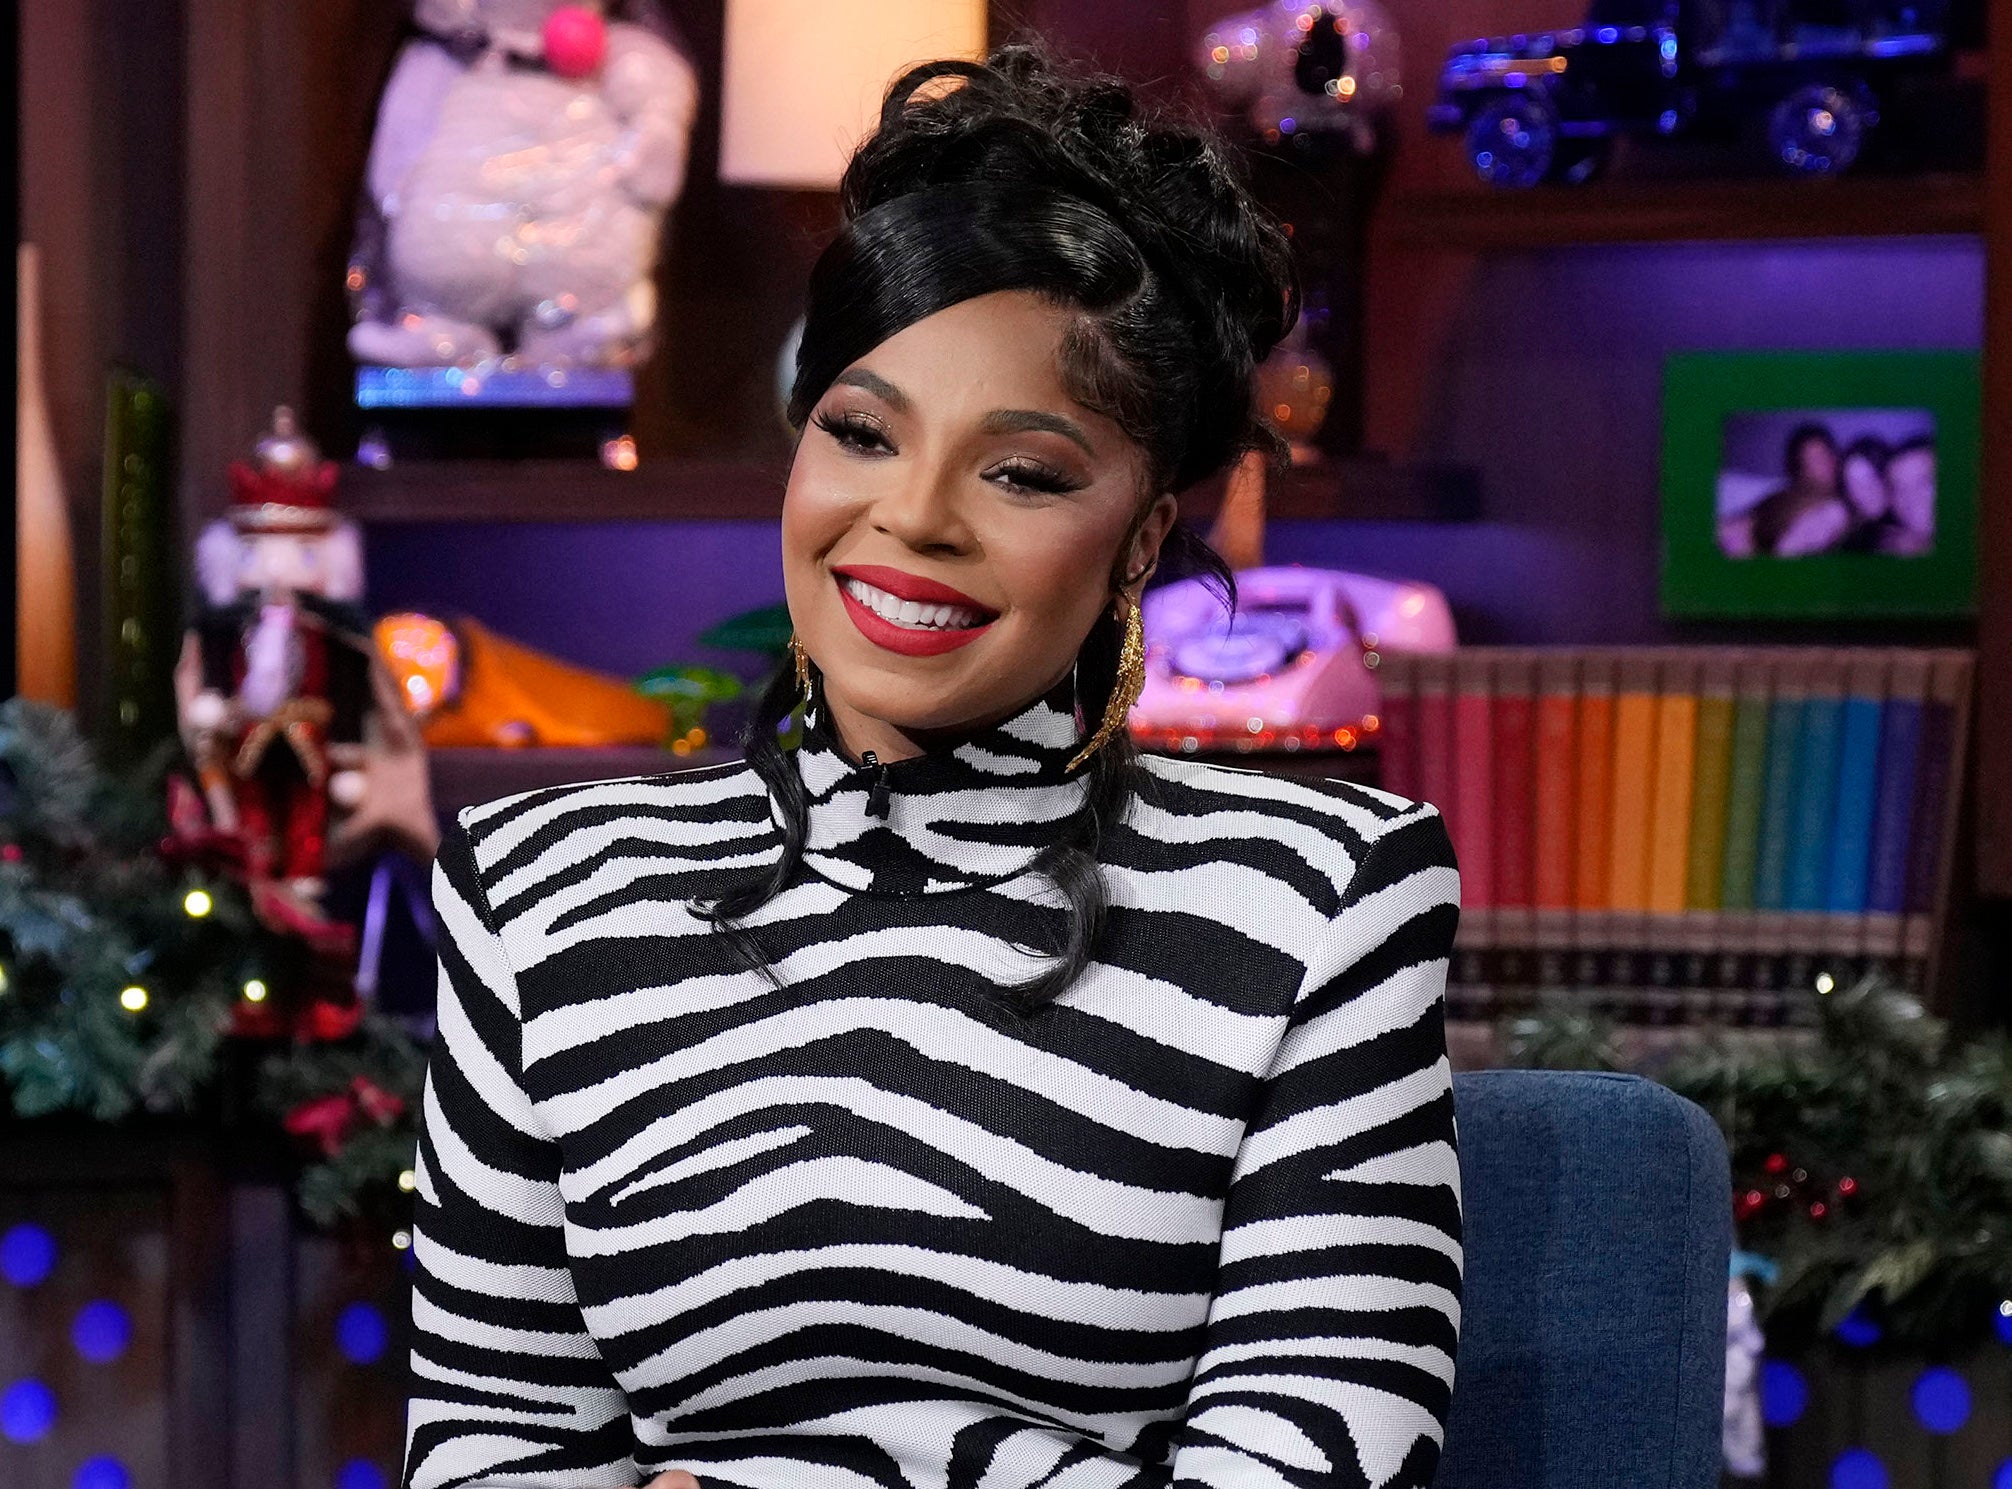 WATCH: Ashanti Revisits A Cult Classic With ‘A New Diva’s Christmas Carol’